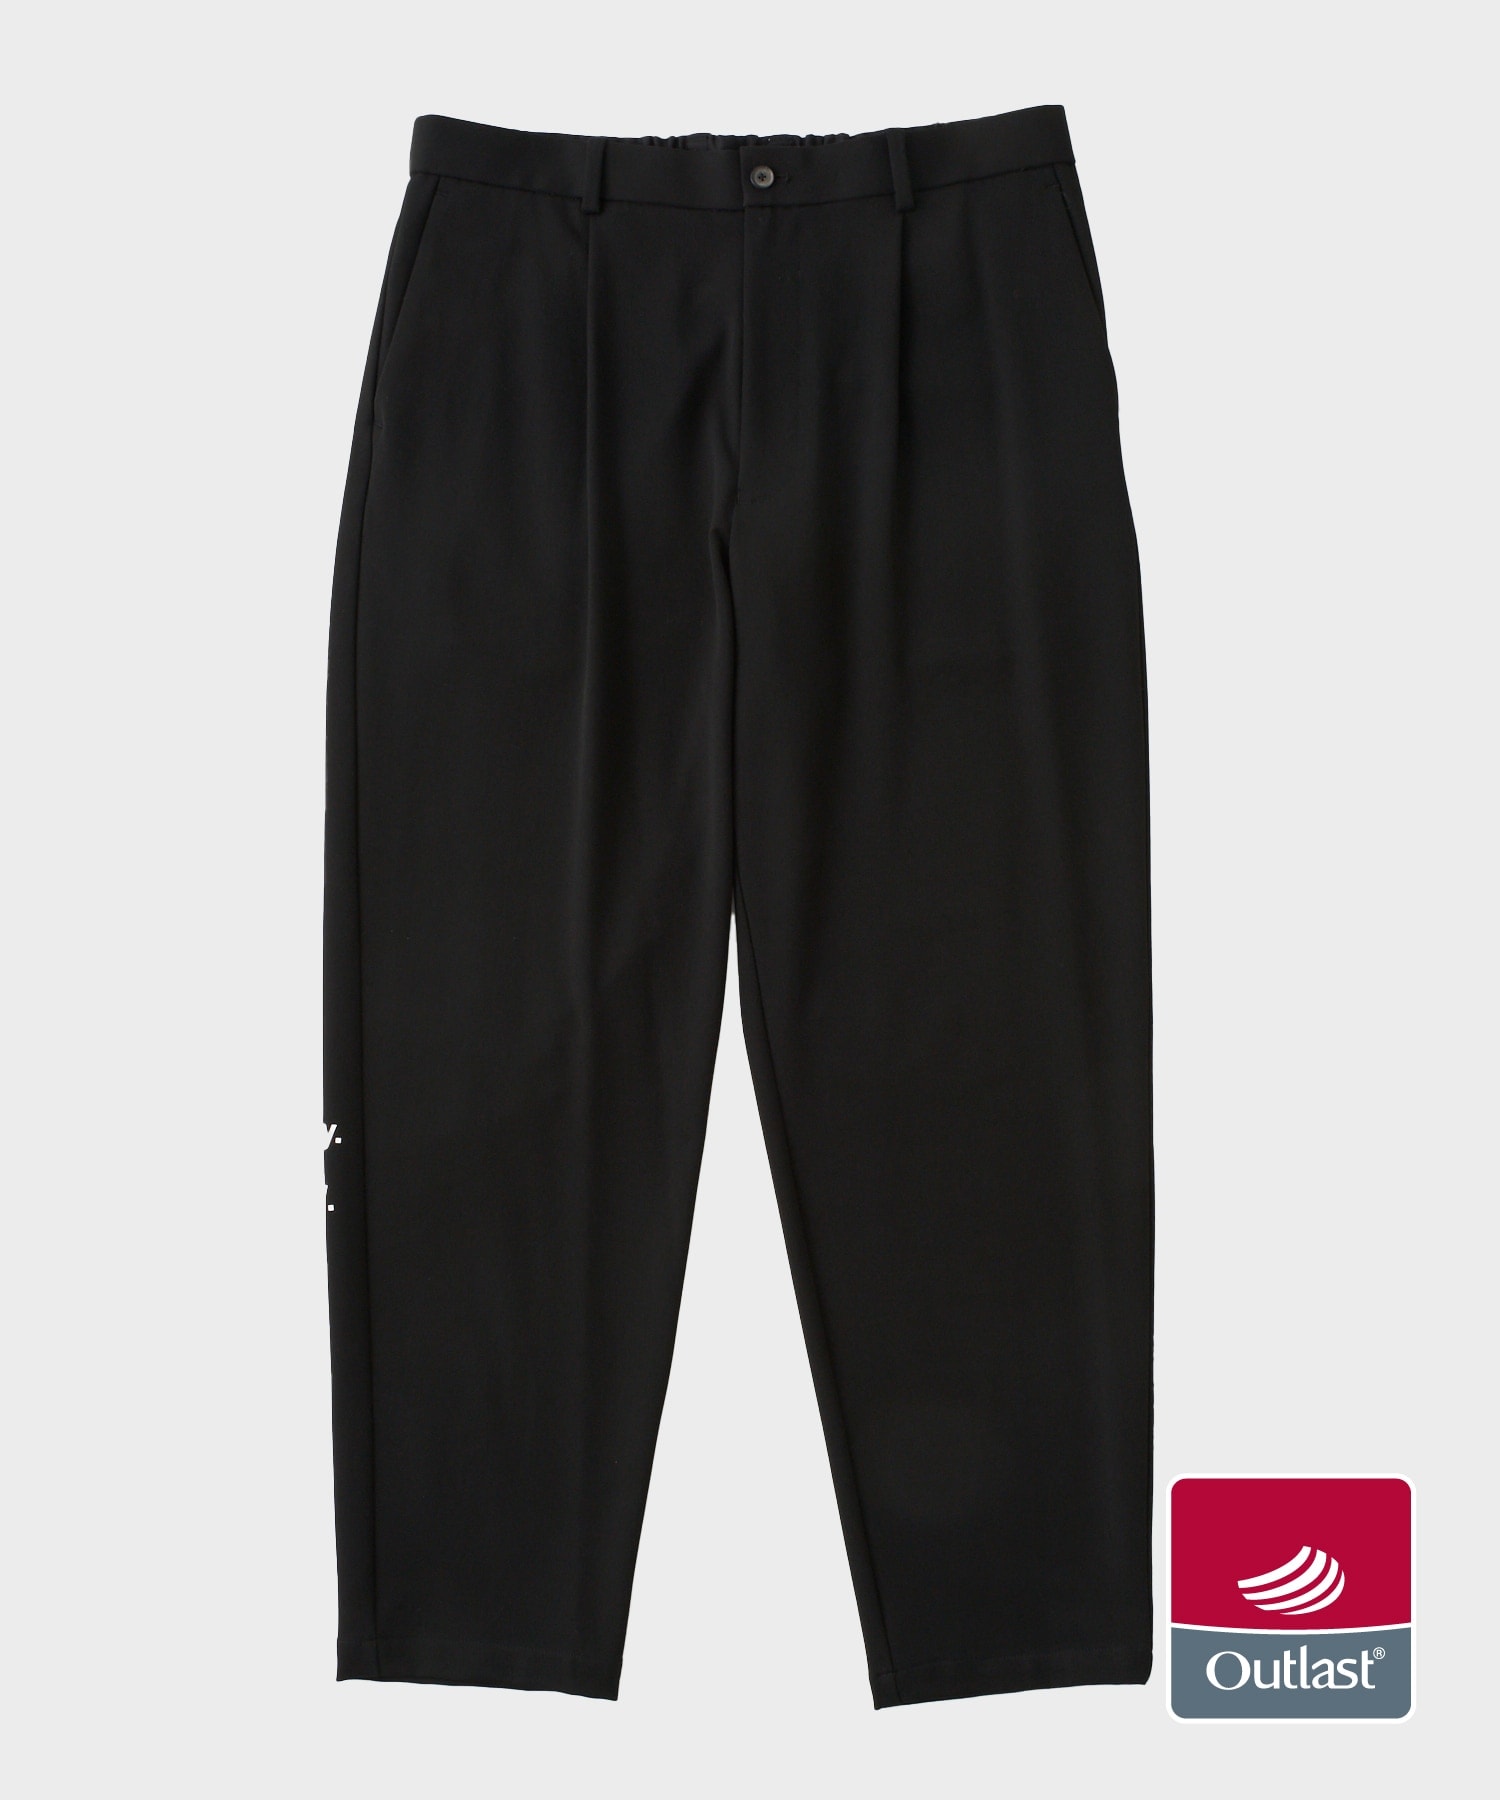 EVANGELION outlast trousers